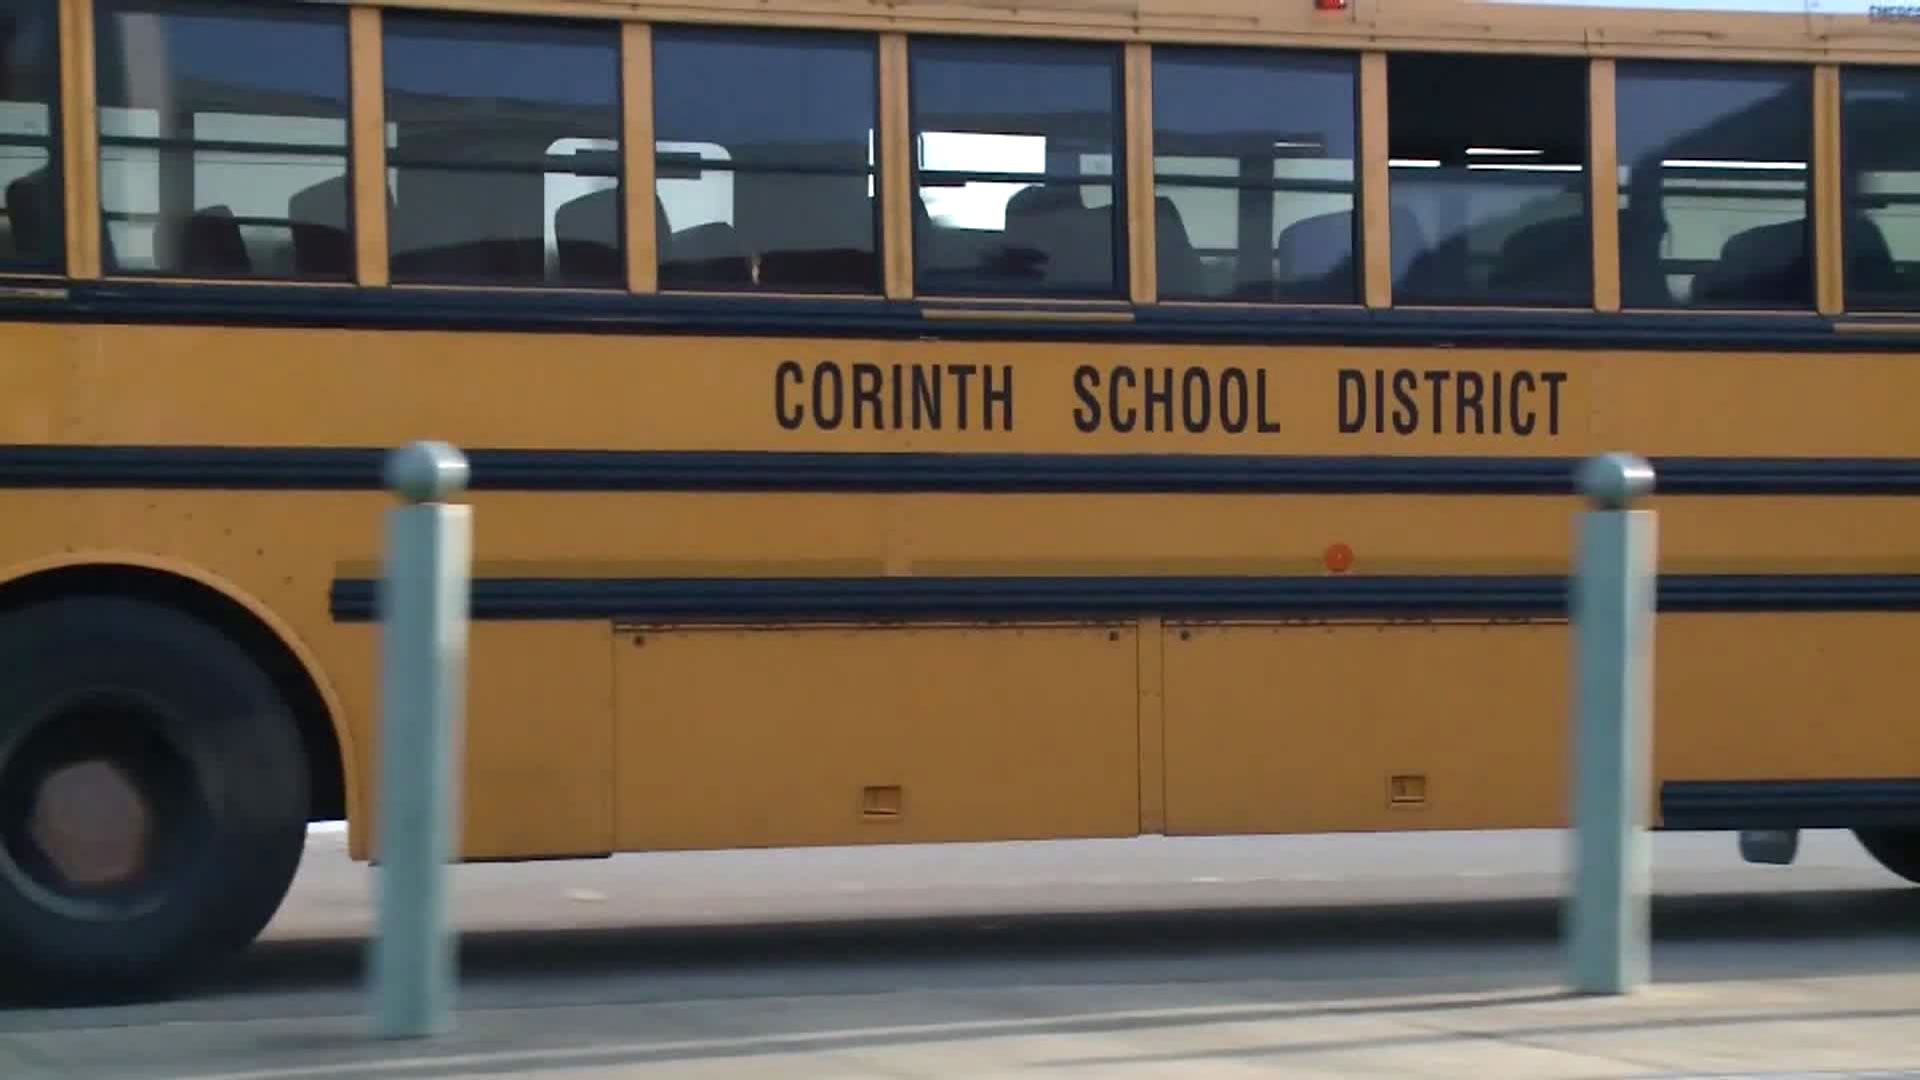 More Than 110 Students Quarantined In School District In U.S. Mississippi